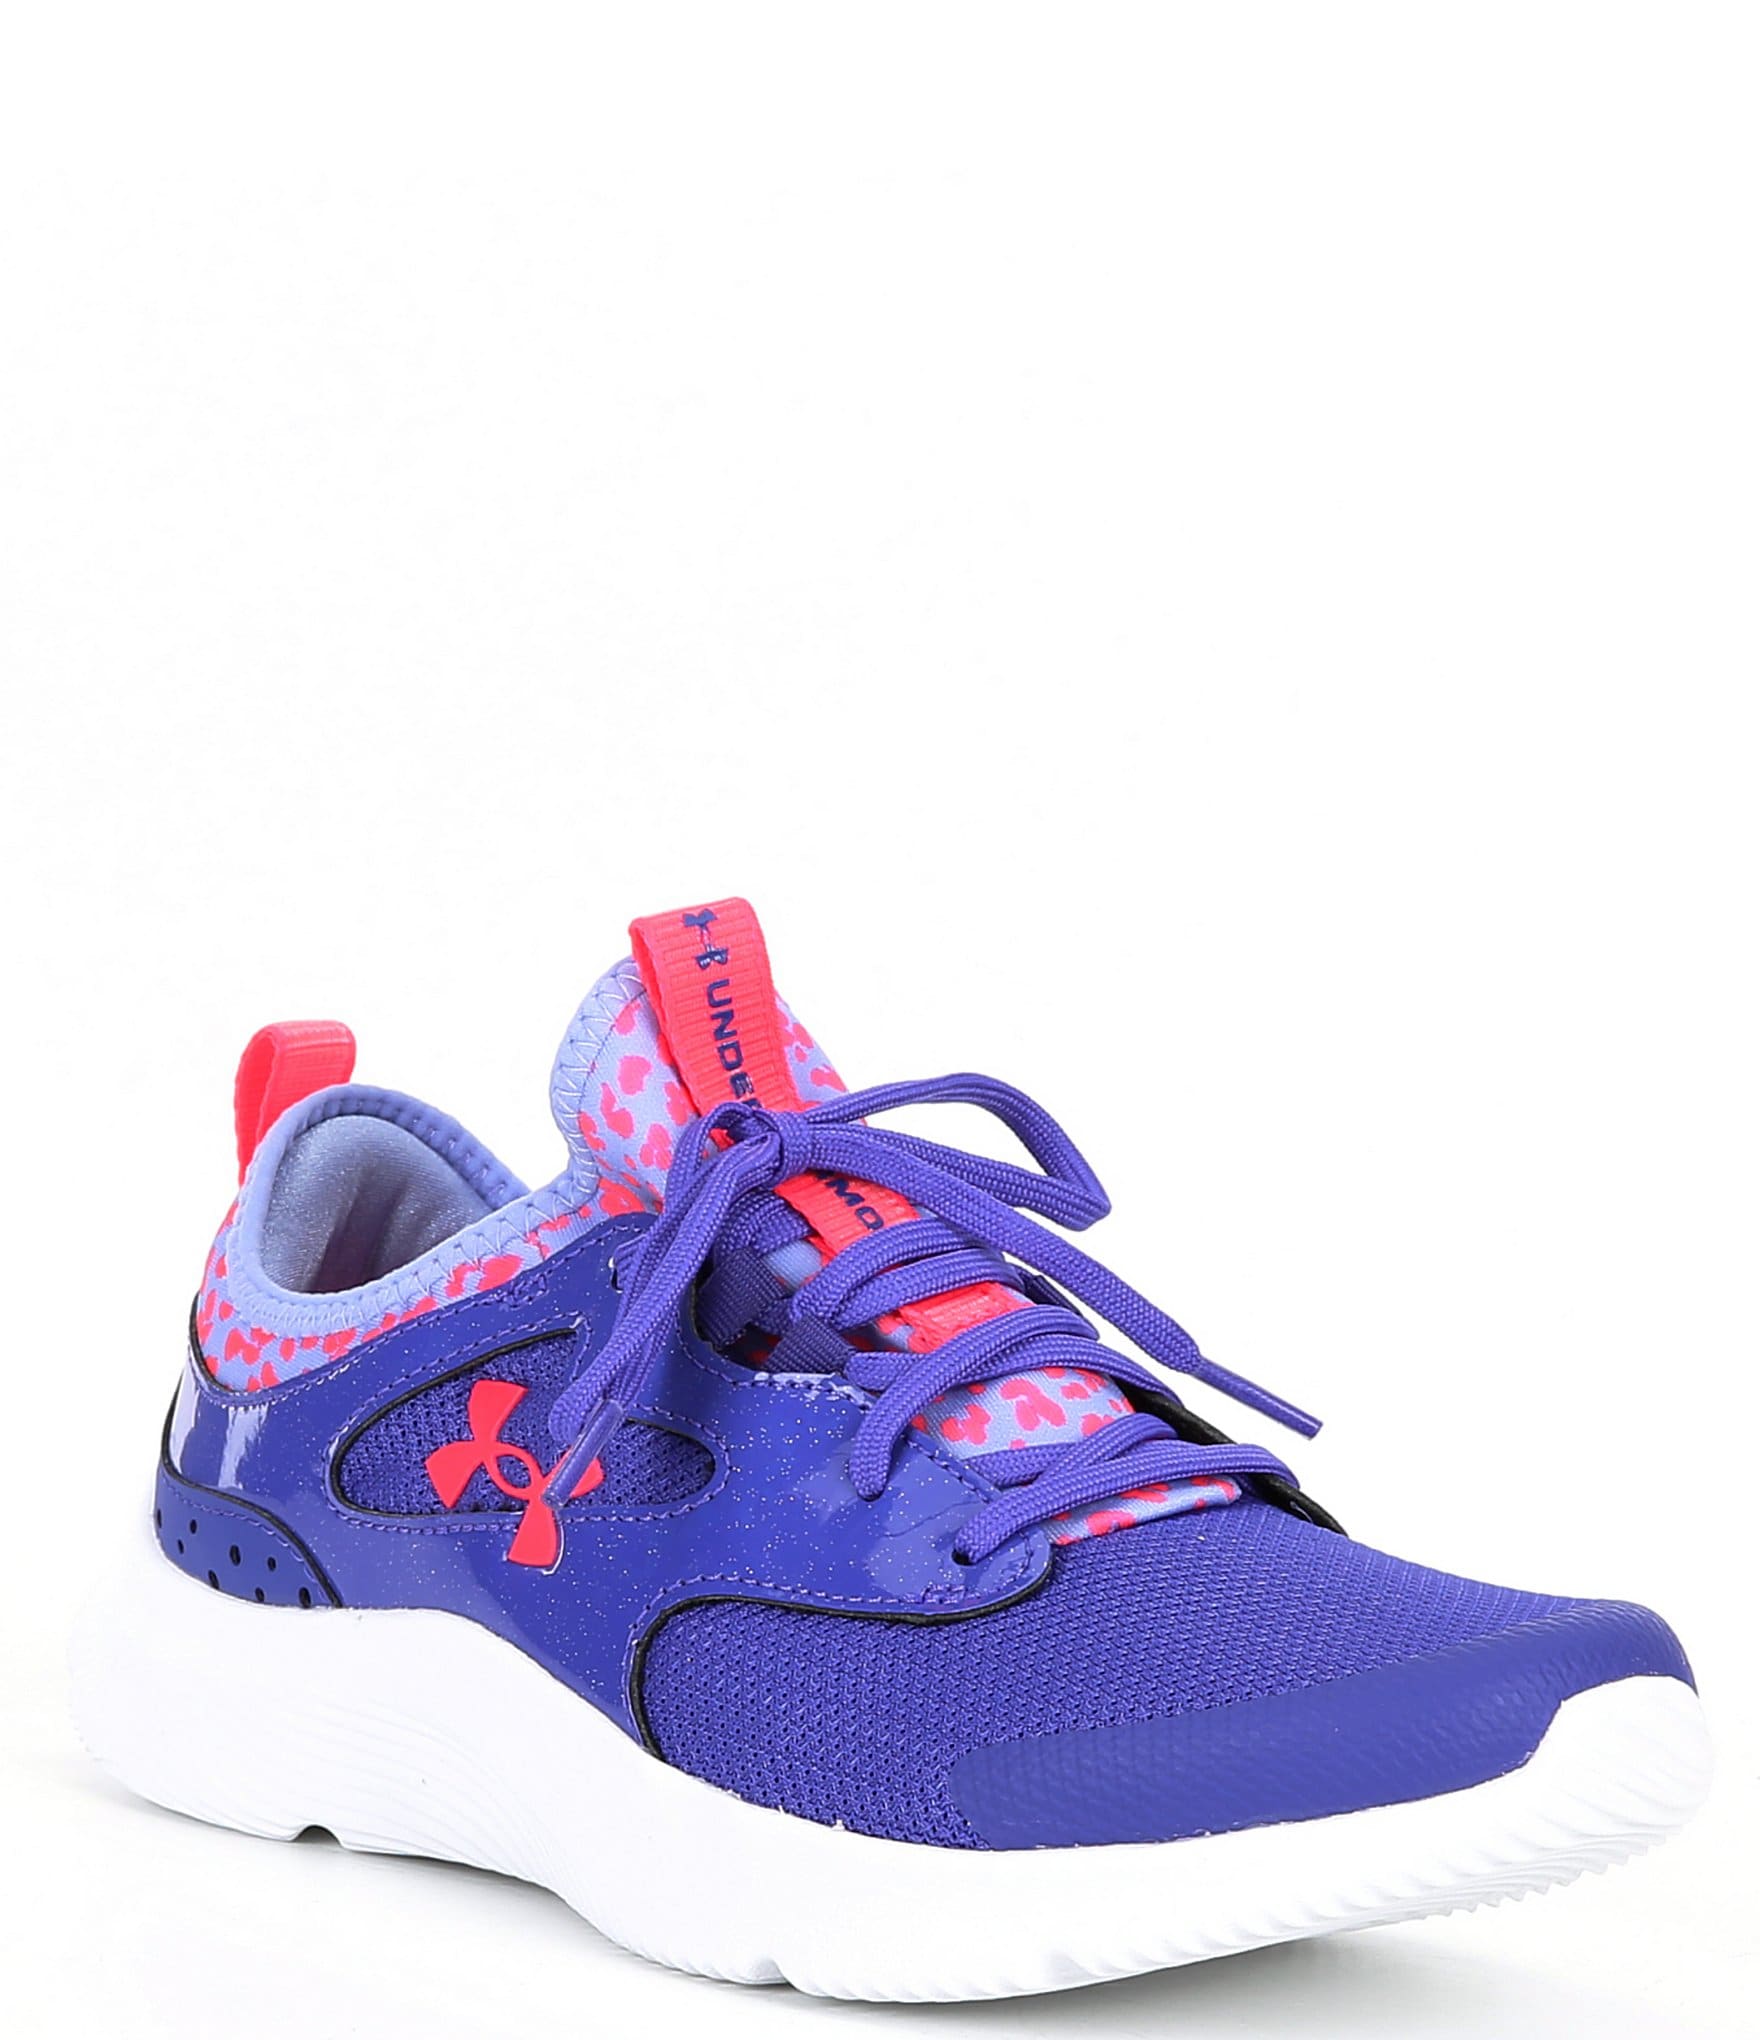 Girls' Under Armour Infinity 2.0 Printed Shoes